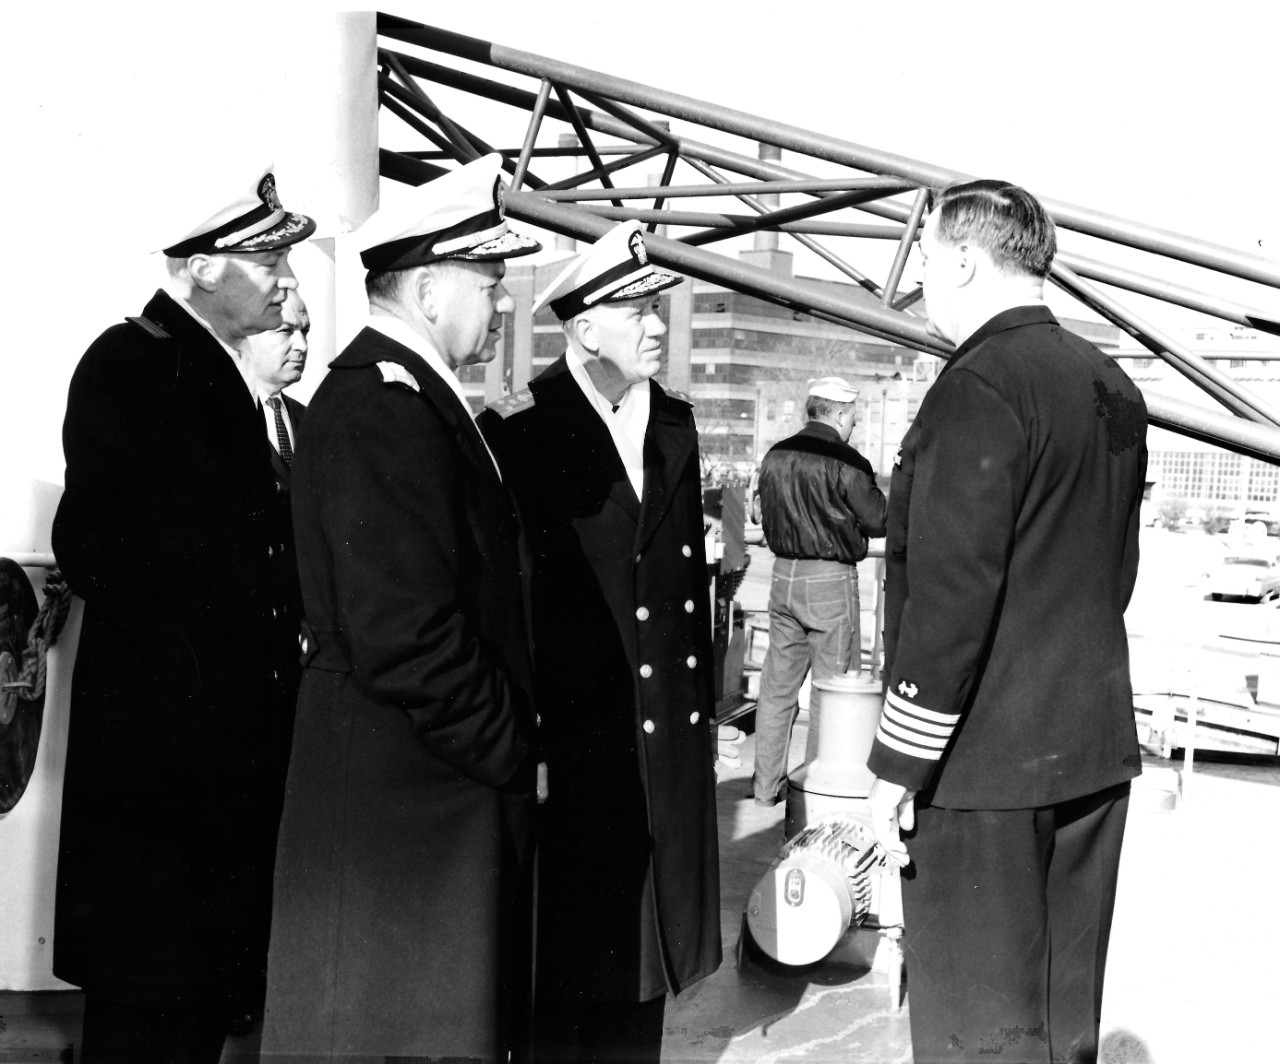 NMUSN-23: USNS James. M. Gilliss (T-AGOR-4), December 1962. Naval Historical Display Center’s Director, Captain Slade D. Cutter, USN, discusses with Vice Admiral Roy A. Gano, USN, Commander, Military Sea Transportation Service, Rear Admiral Arthu...